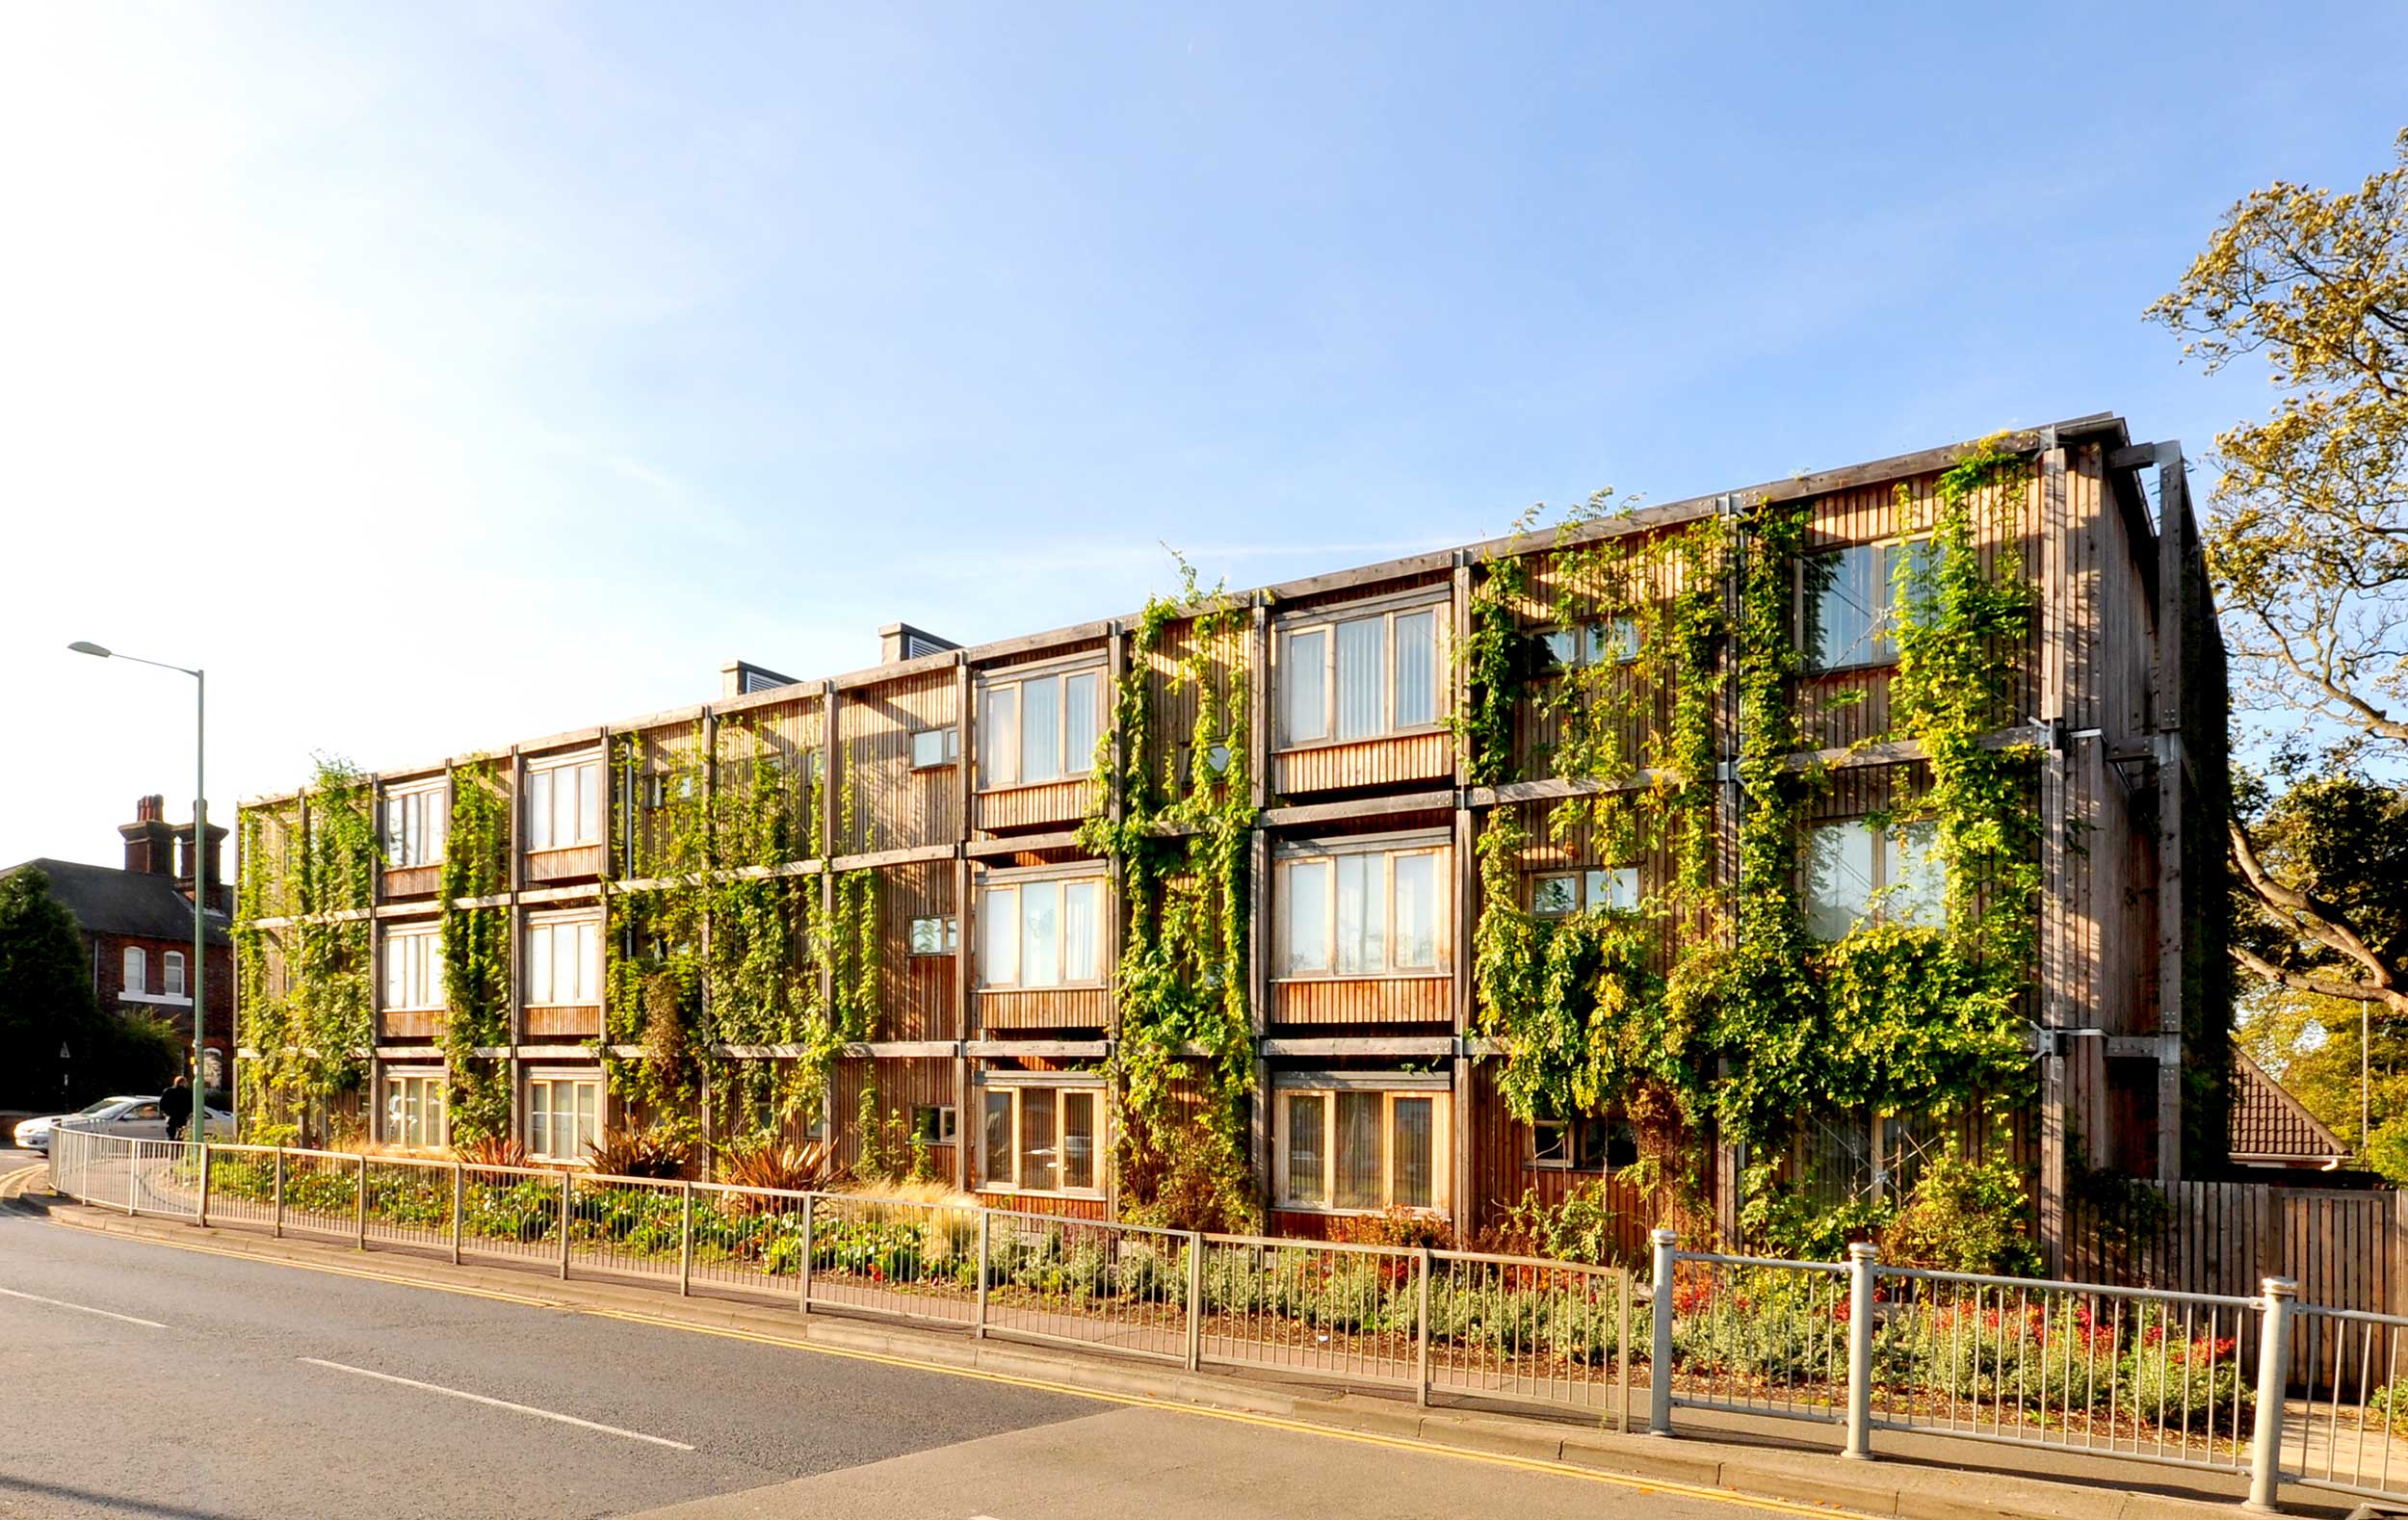 Kings Road Flats affordable social housing riba east award dwelling modece architects suffolk sustainable eco 